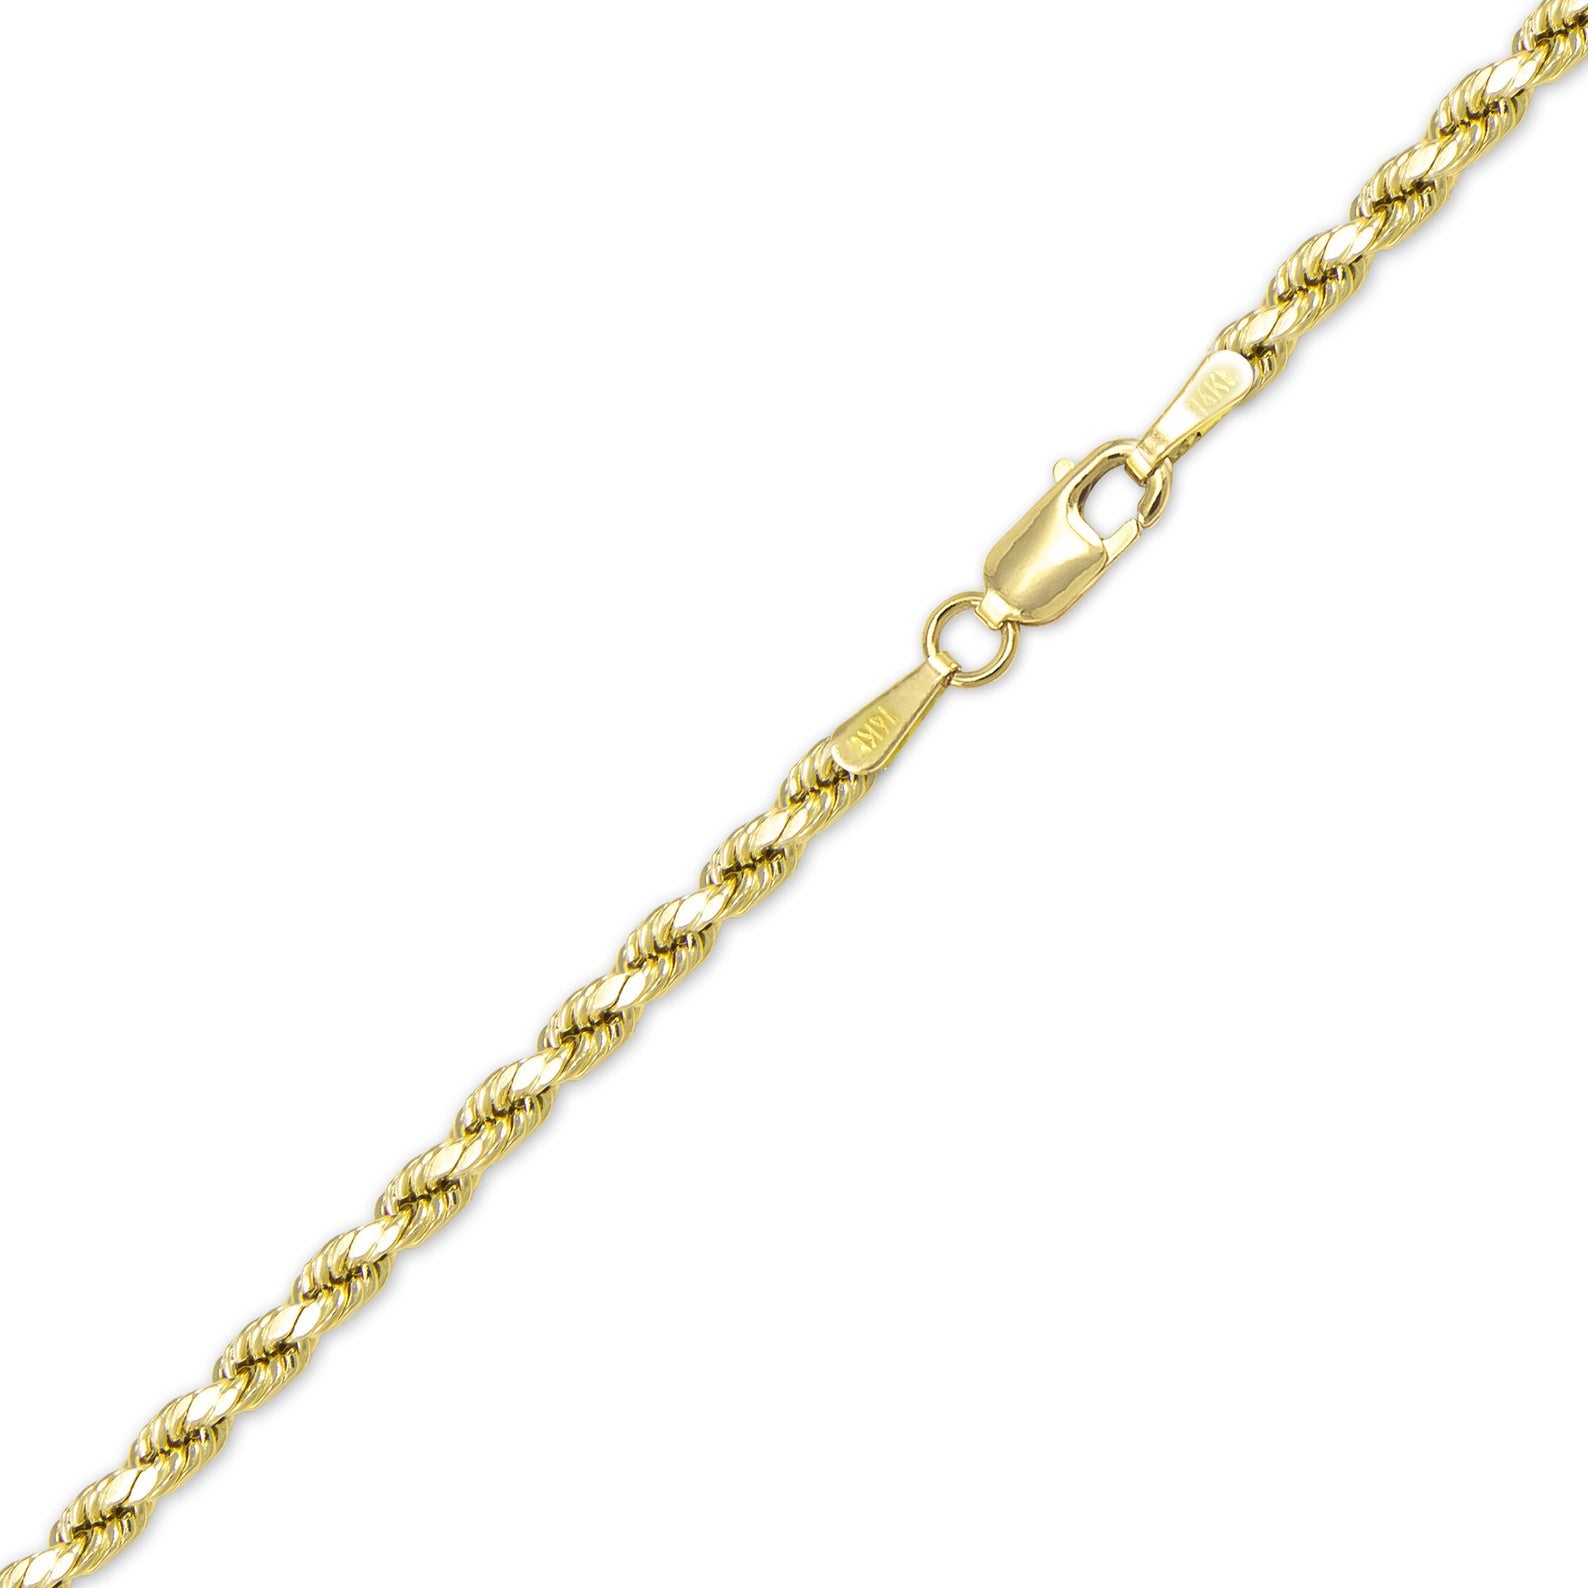 coiled-metallic-chain-link-anklet.jpg